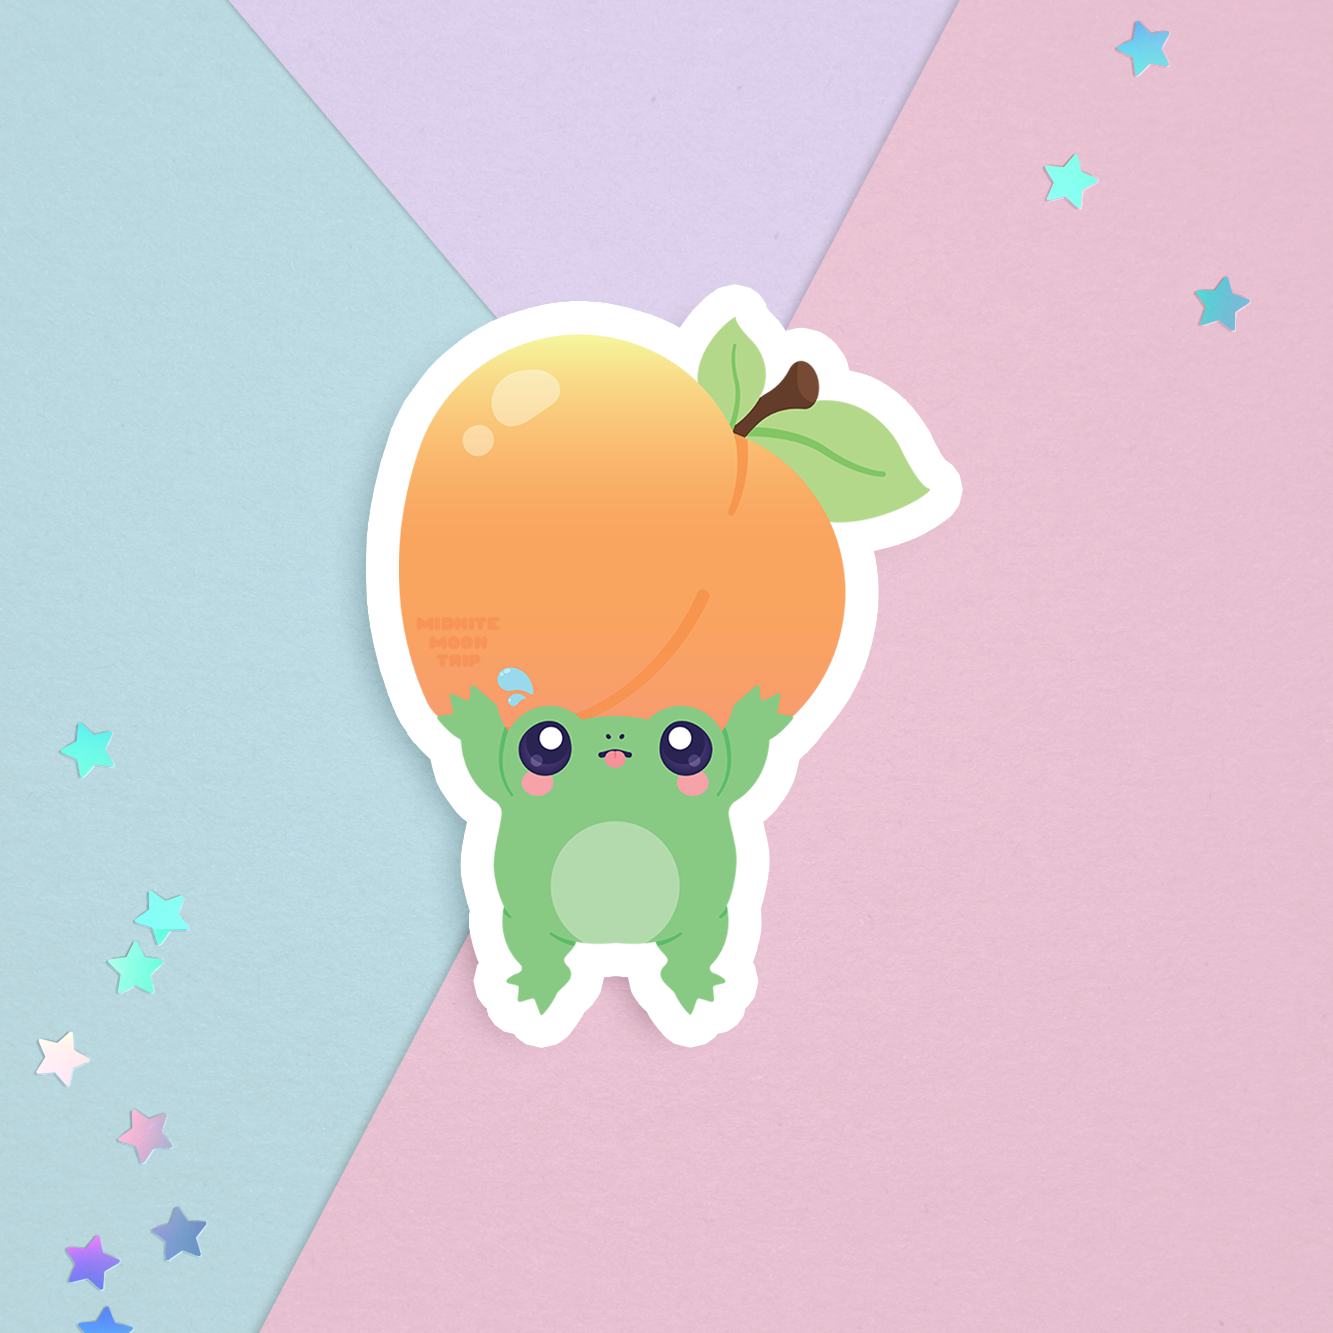 sticker of cute kawaii green frog with muscles lifting a peach